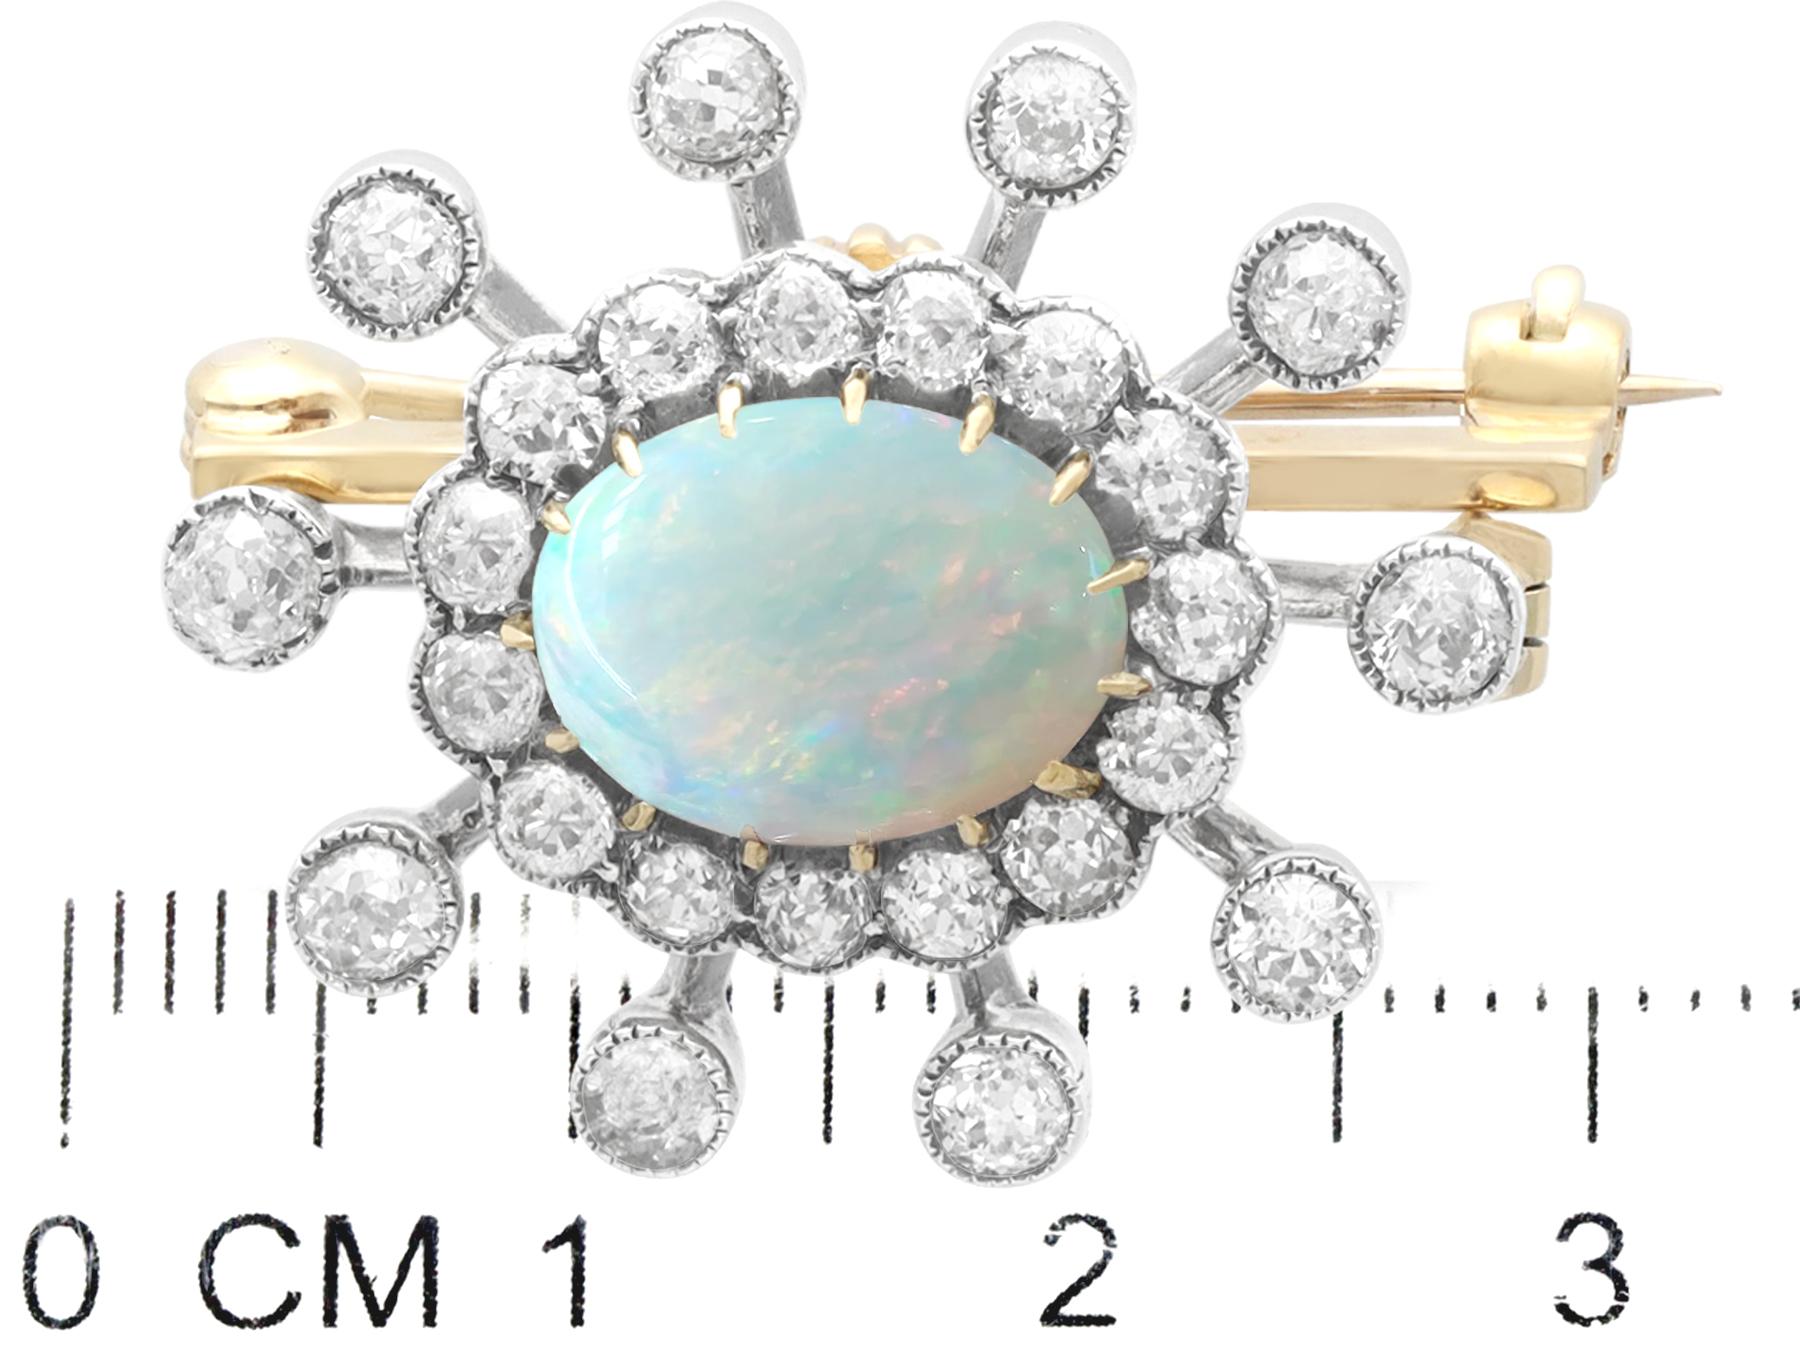 Antique 2.60 Carat Opal and 2.95 Carat Diamond, 9K Yellow Gold Brooch / Pendant In Excellent Condition For Sale In Jesmond, Newcastle Upon Tyne